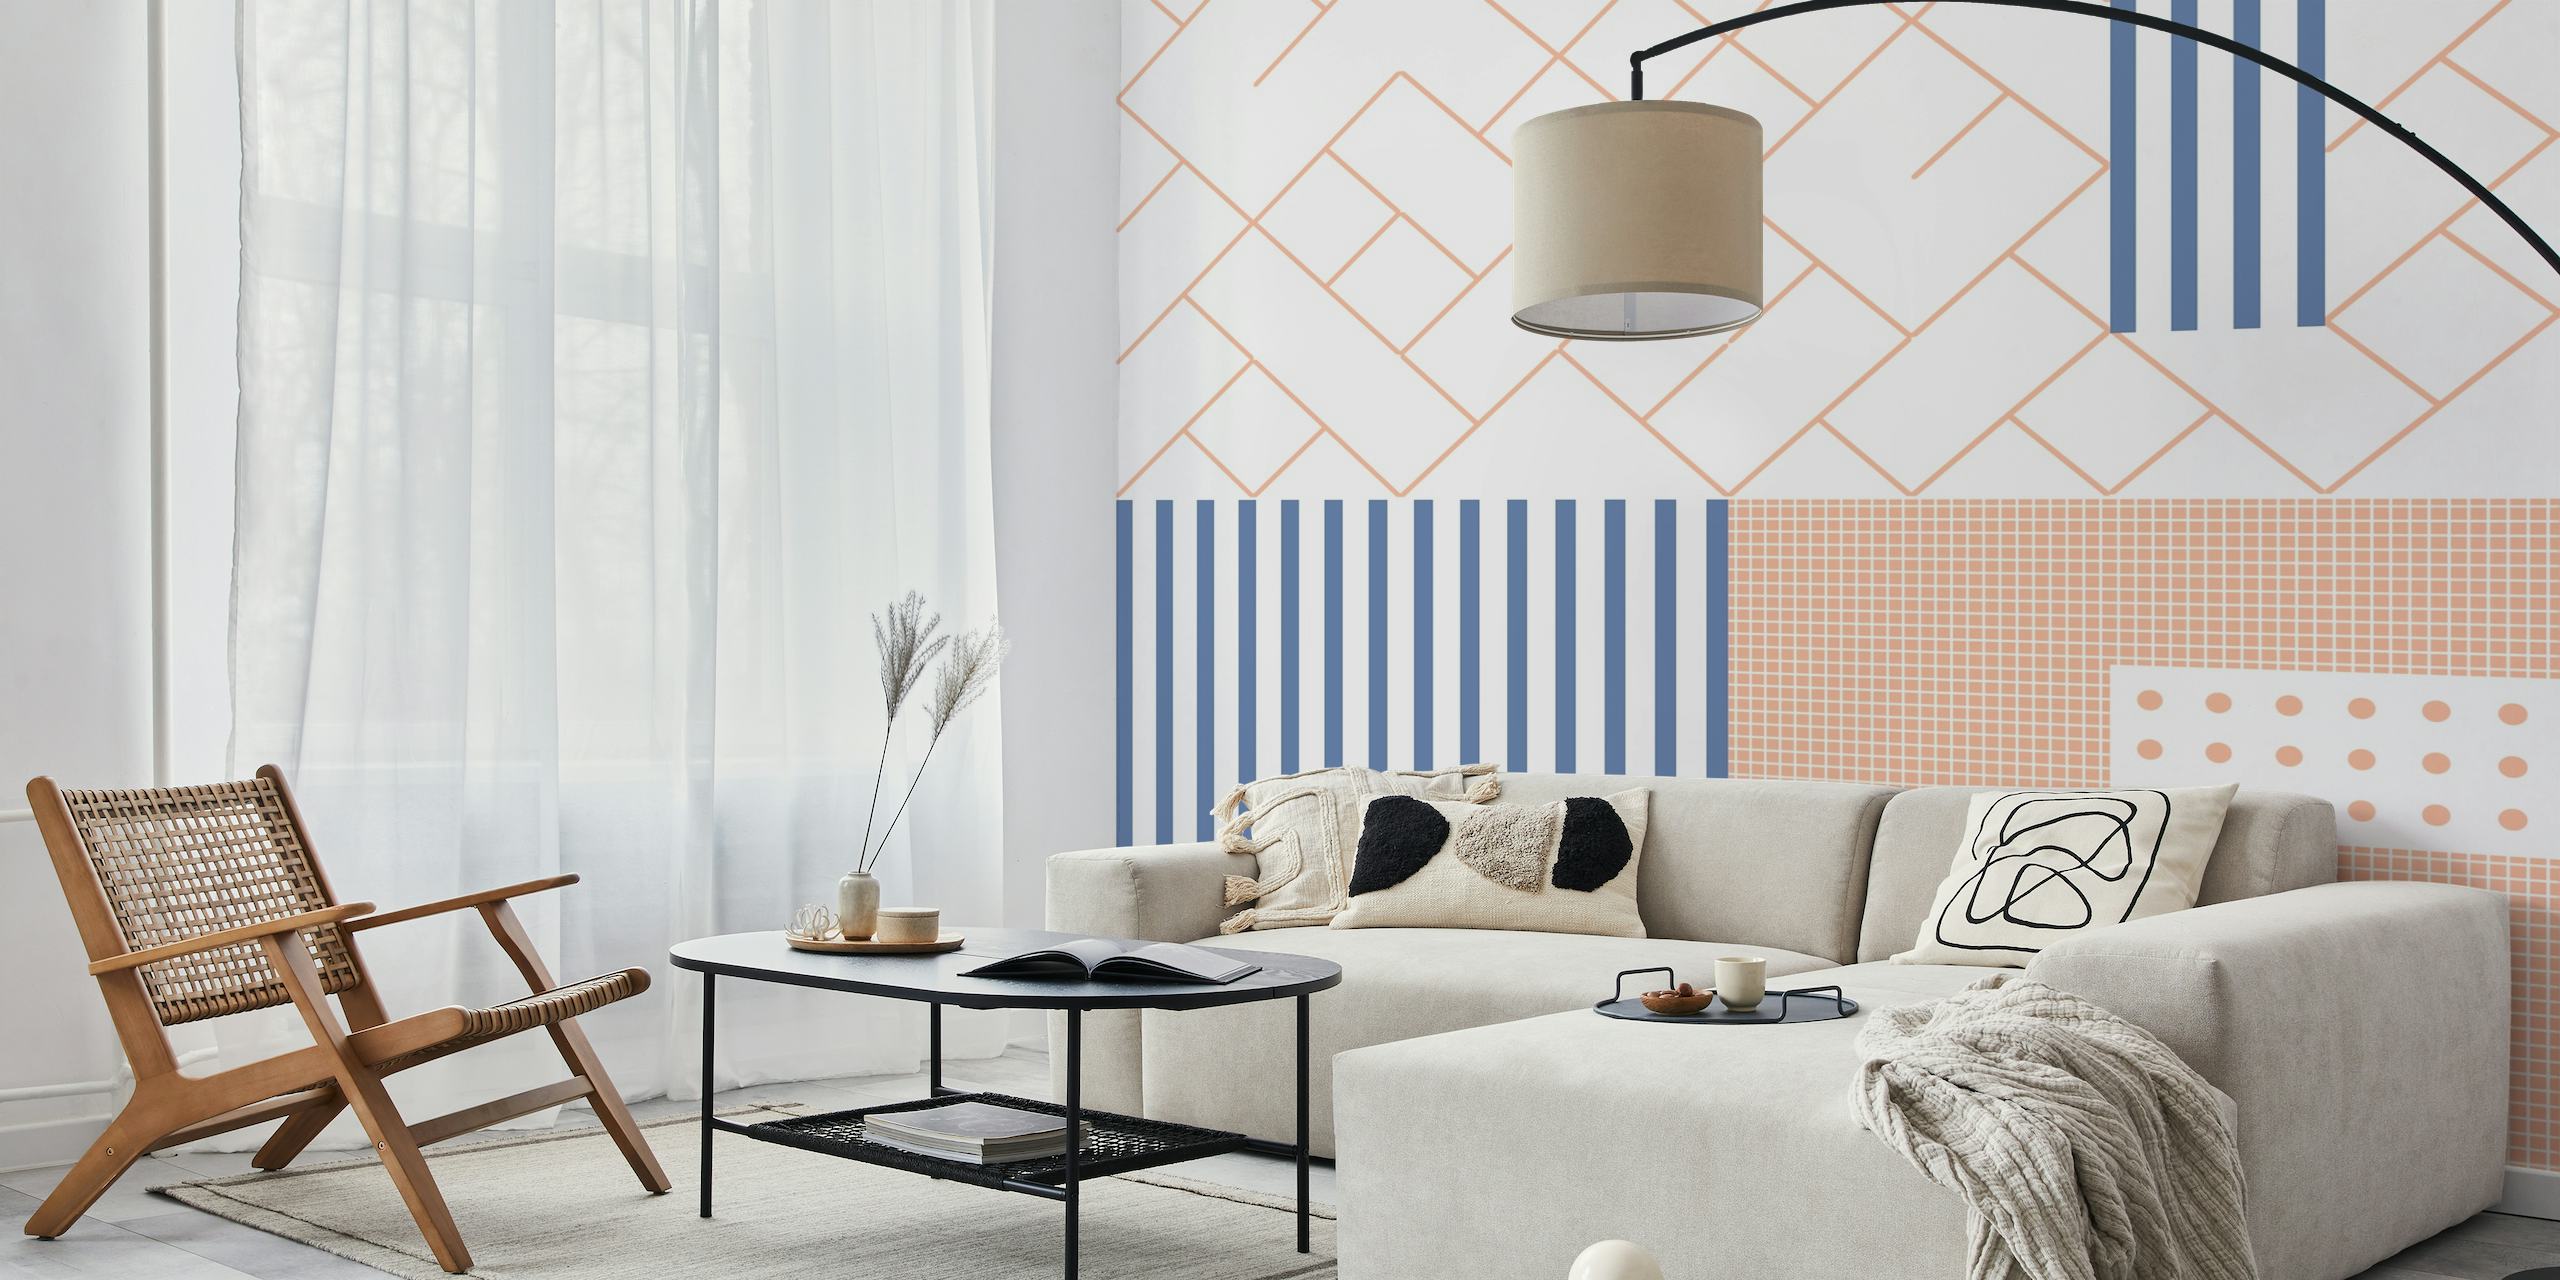 Geo Fav 06 wall mural featuring geometric patterns with pink, blue, and white colors